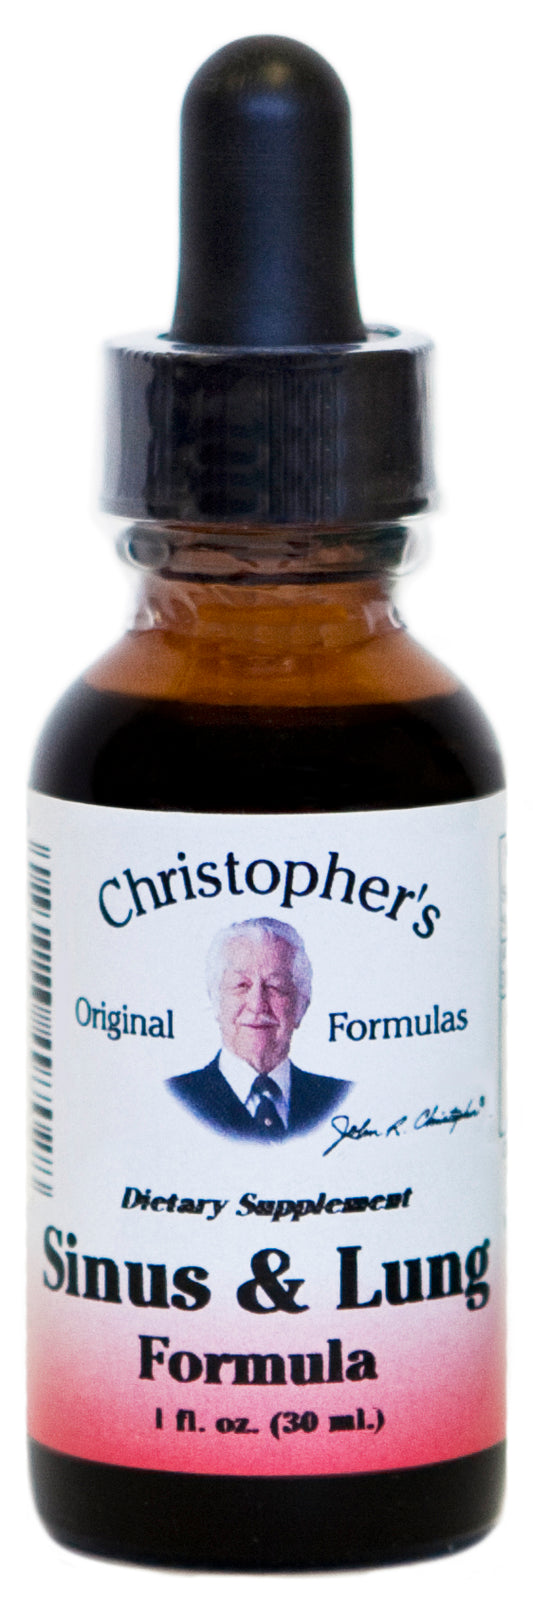 Dr. Christopher's Sinus & Lung Extract